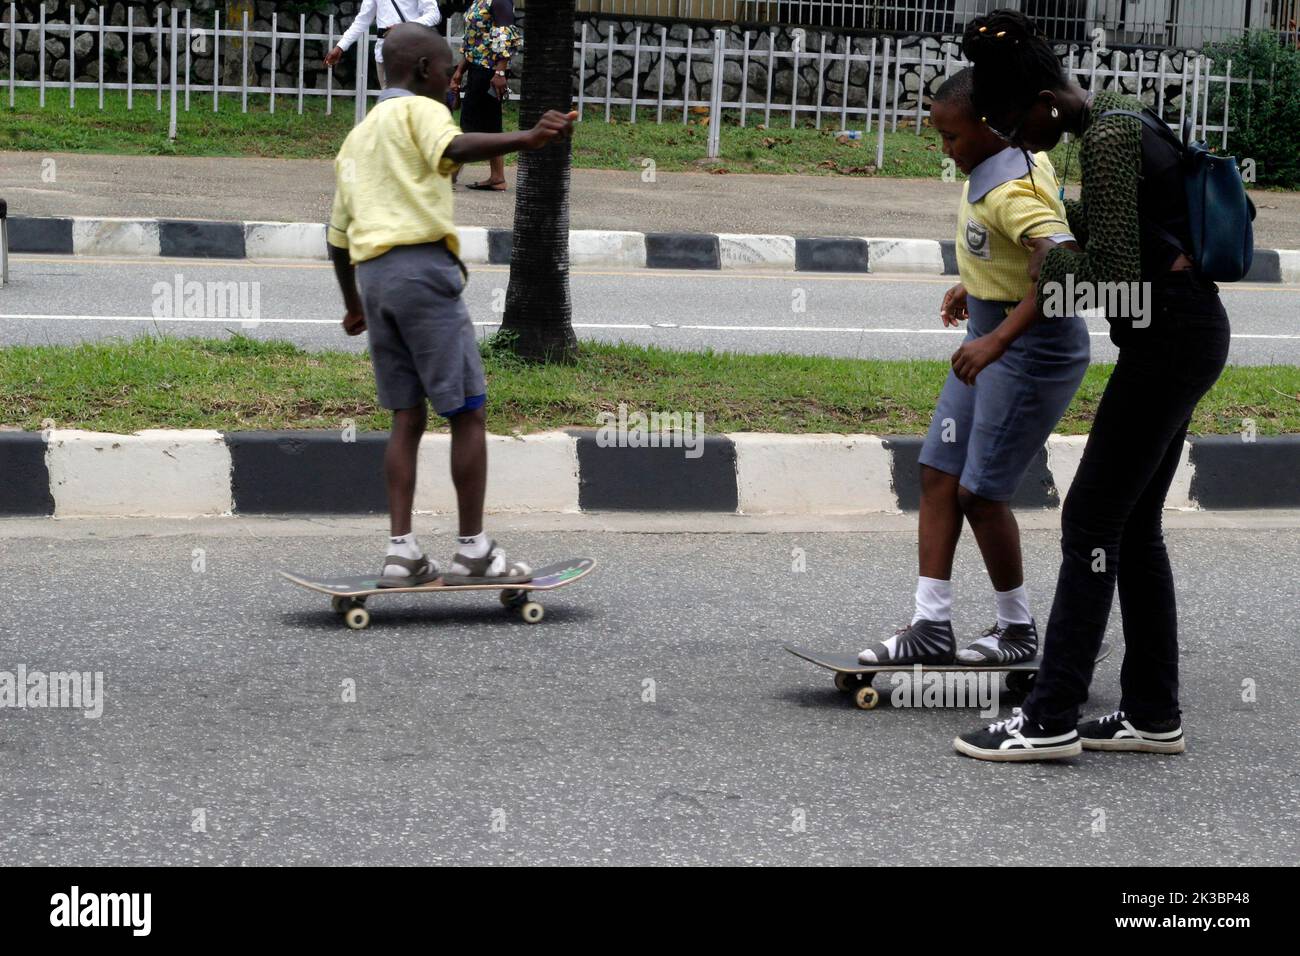 Lagos Celebrates 2022 World Car Free Day Lagos, Nigeria. 25th Sep, 2022. School children learn skating in Alausa as Lagos State Government celebrates 2022 World Car Free Day at Alausa, Ikeja, Lagos, Nigeria on Sunday, September 25 2022. The state government said it has included bicycle parking lot in some of its road infrastructure in order to encourage non-motorized transport plan and enhance citizens' fitness. Credit: Adekunle Ajayi/Alamy Live News Stock Photo